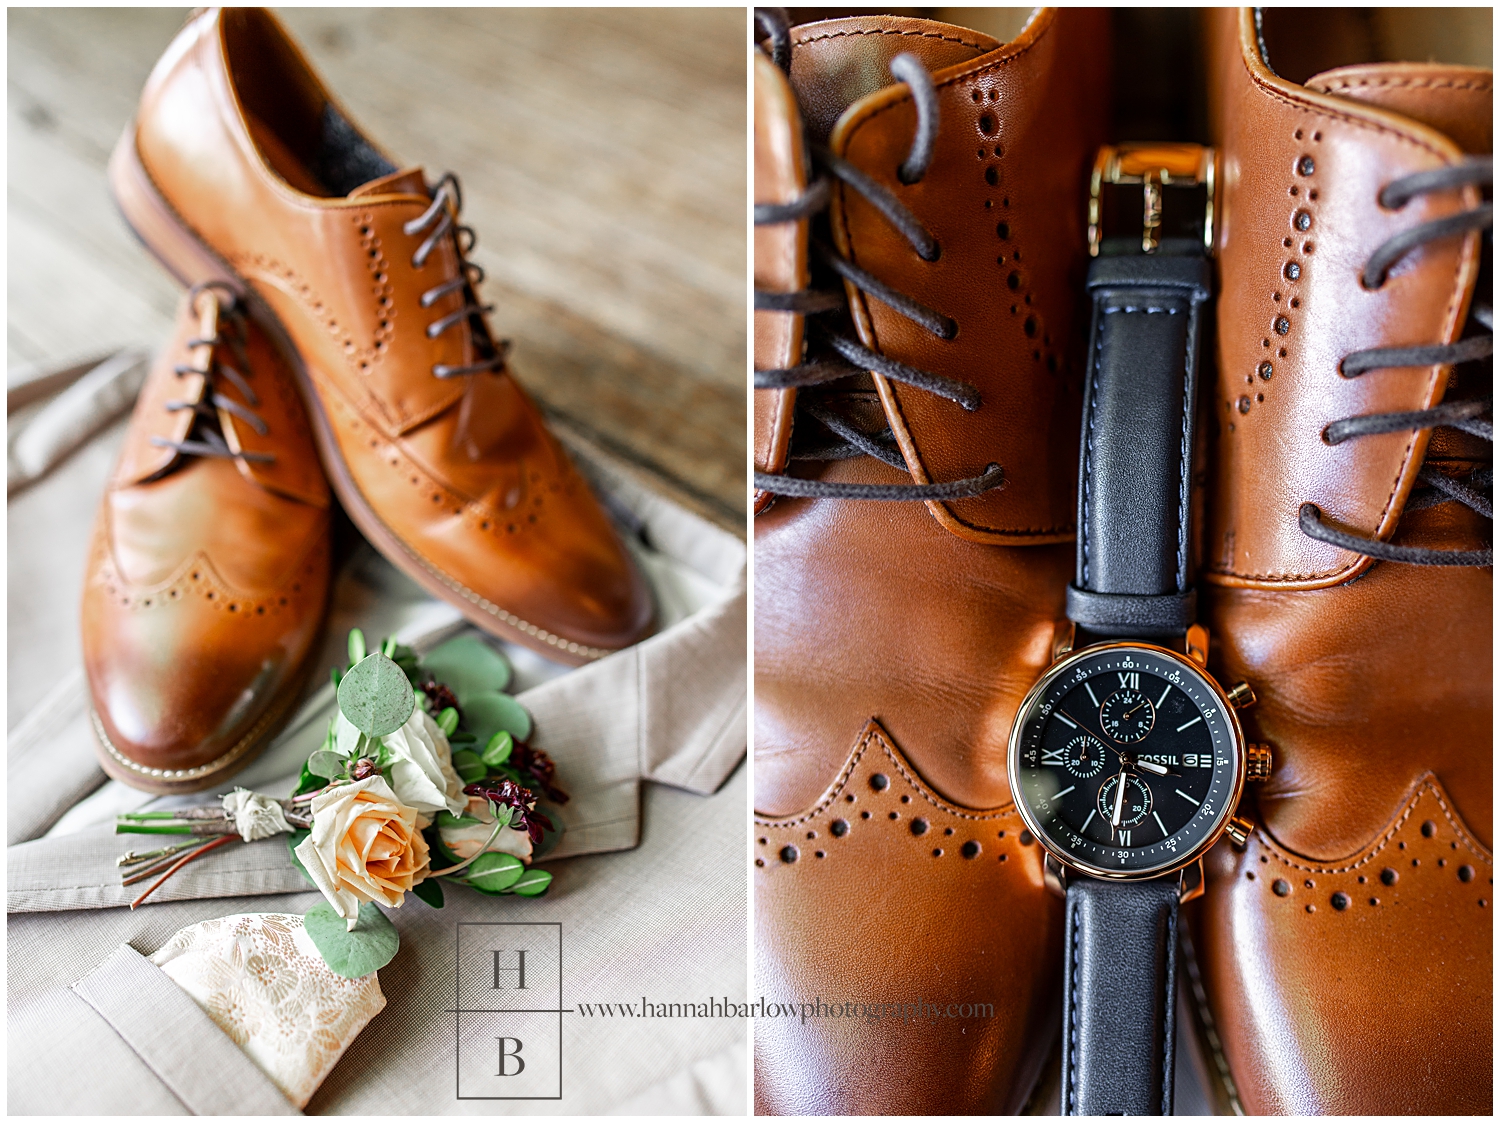 Brown groom's shoes and watch detail photos.